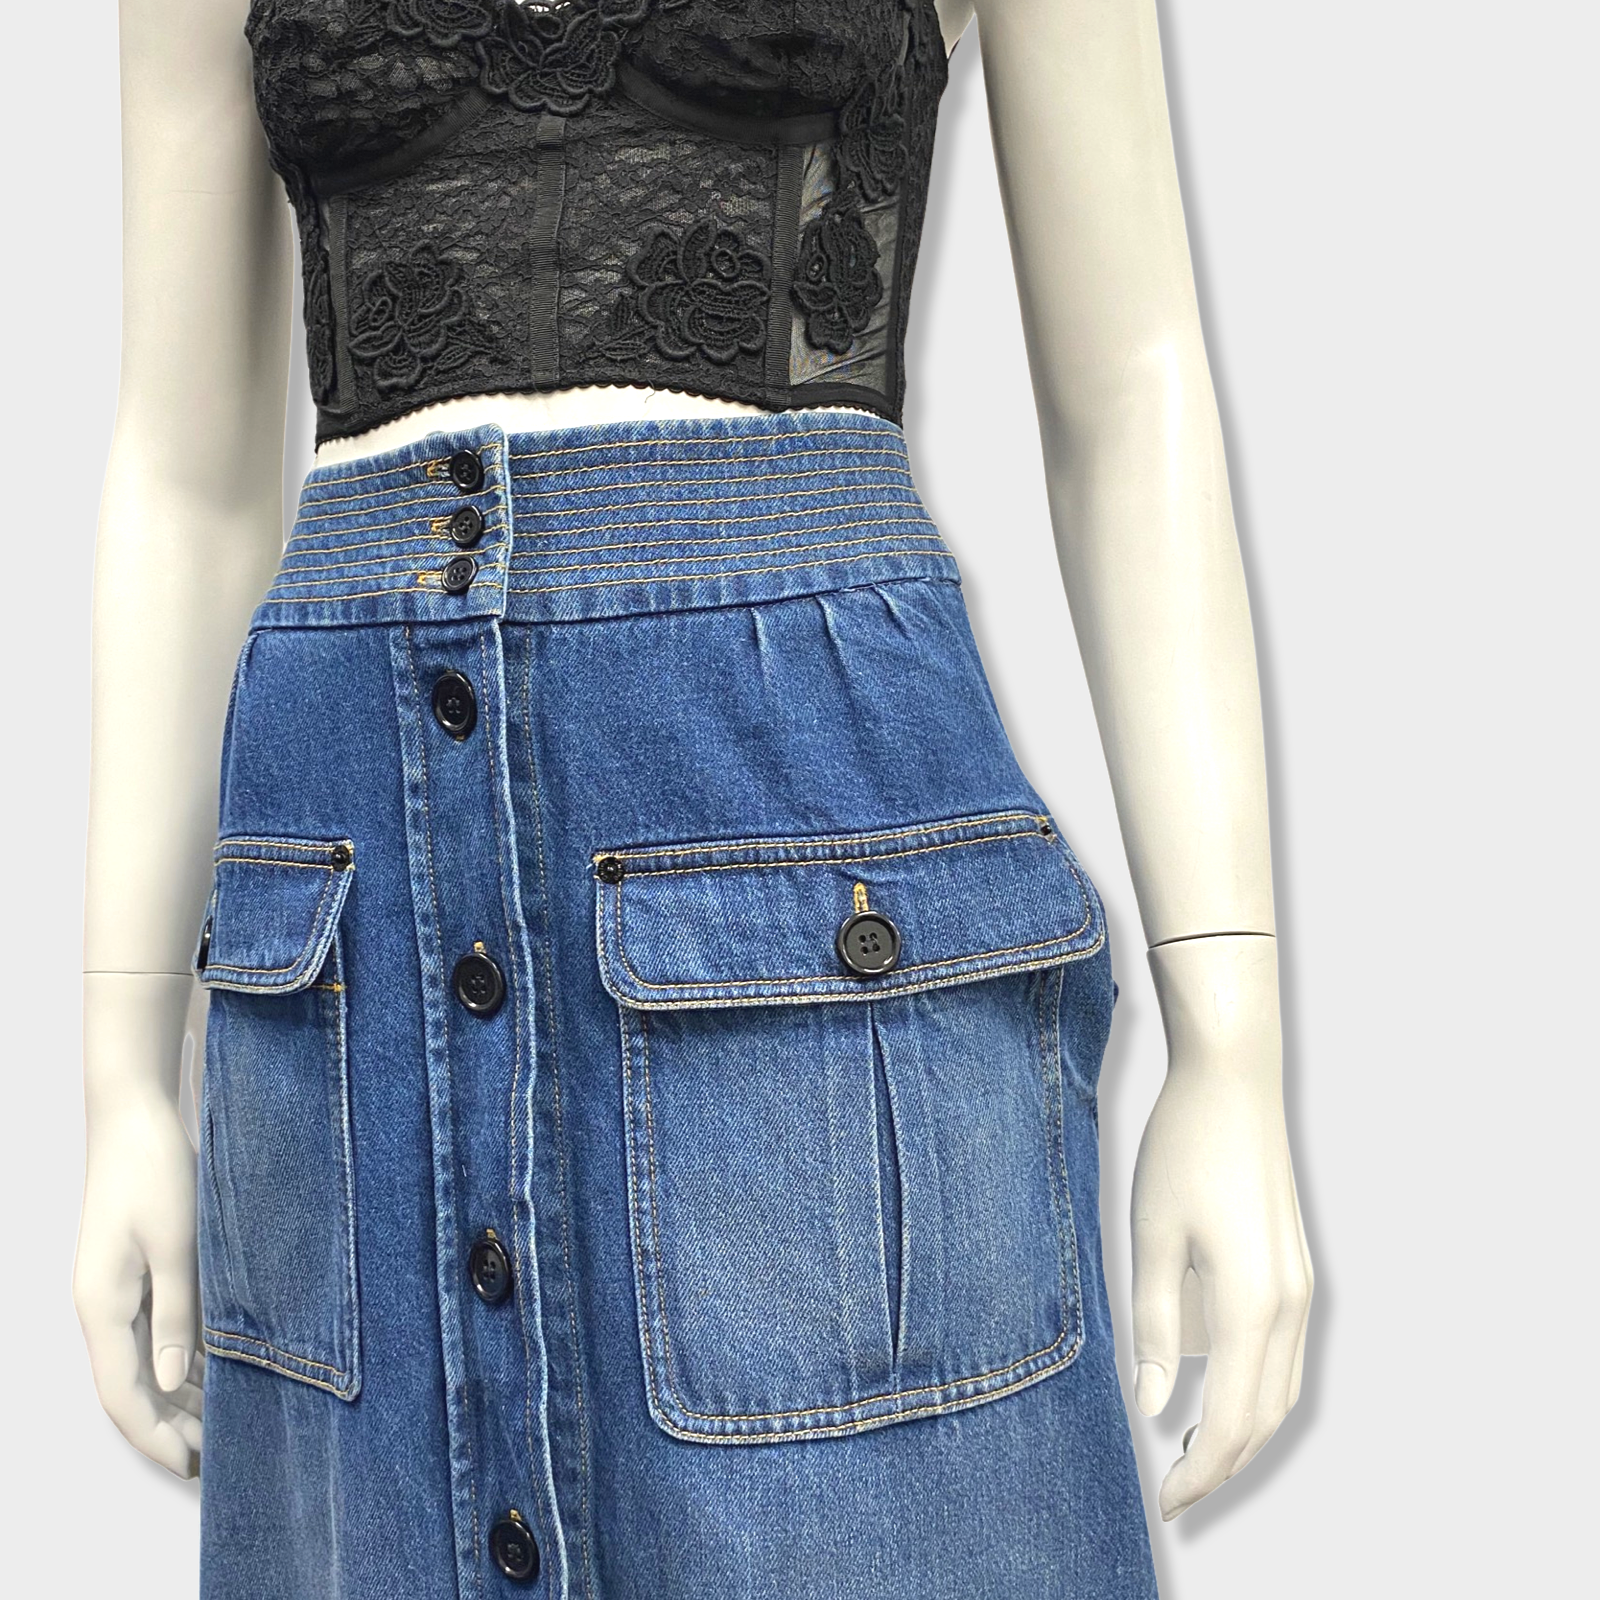 90s Denim Button Front Maxi Skirt - XS to Small, 25